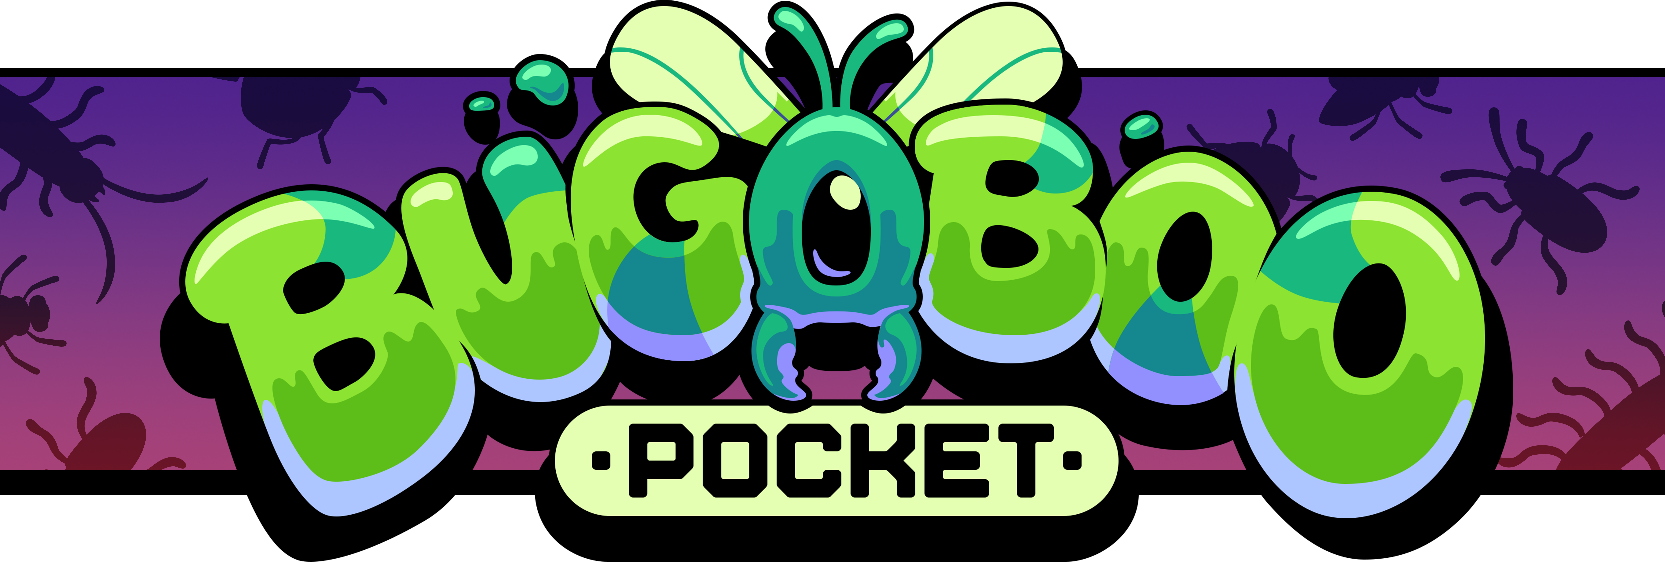 Virtual pet game Bugaboo Pocket announced for Switch